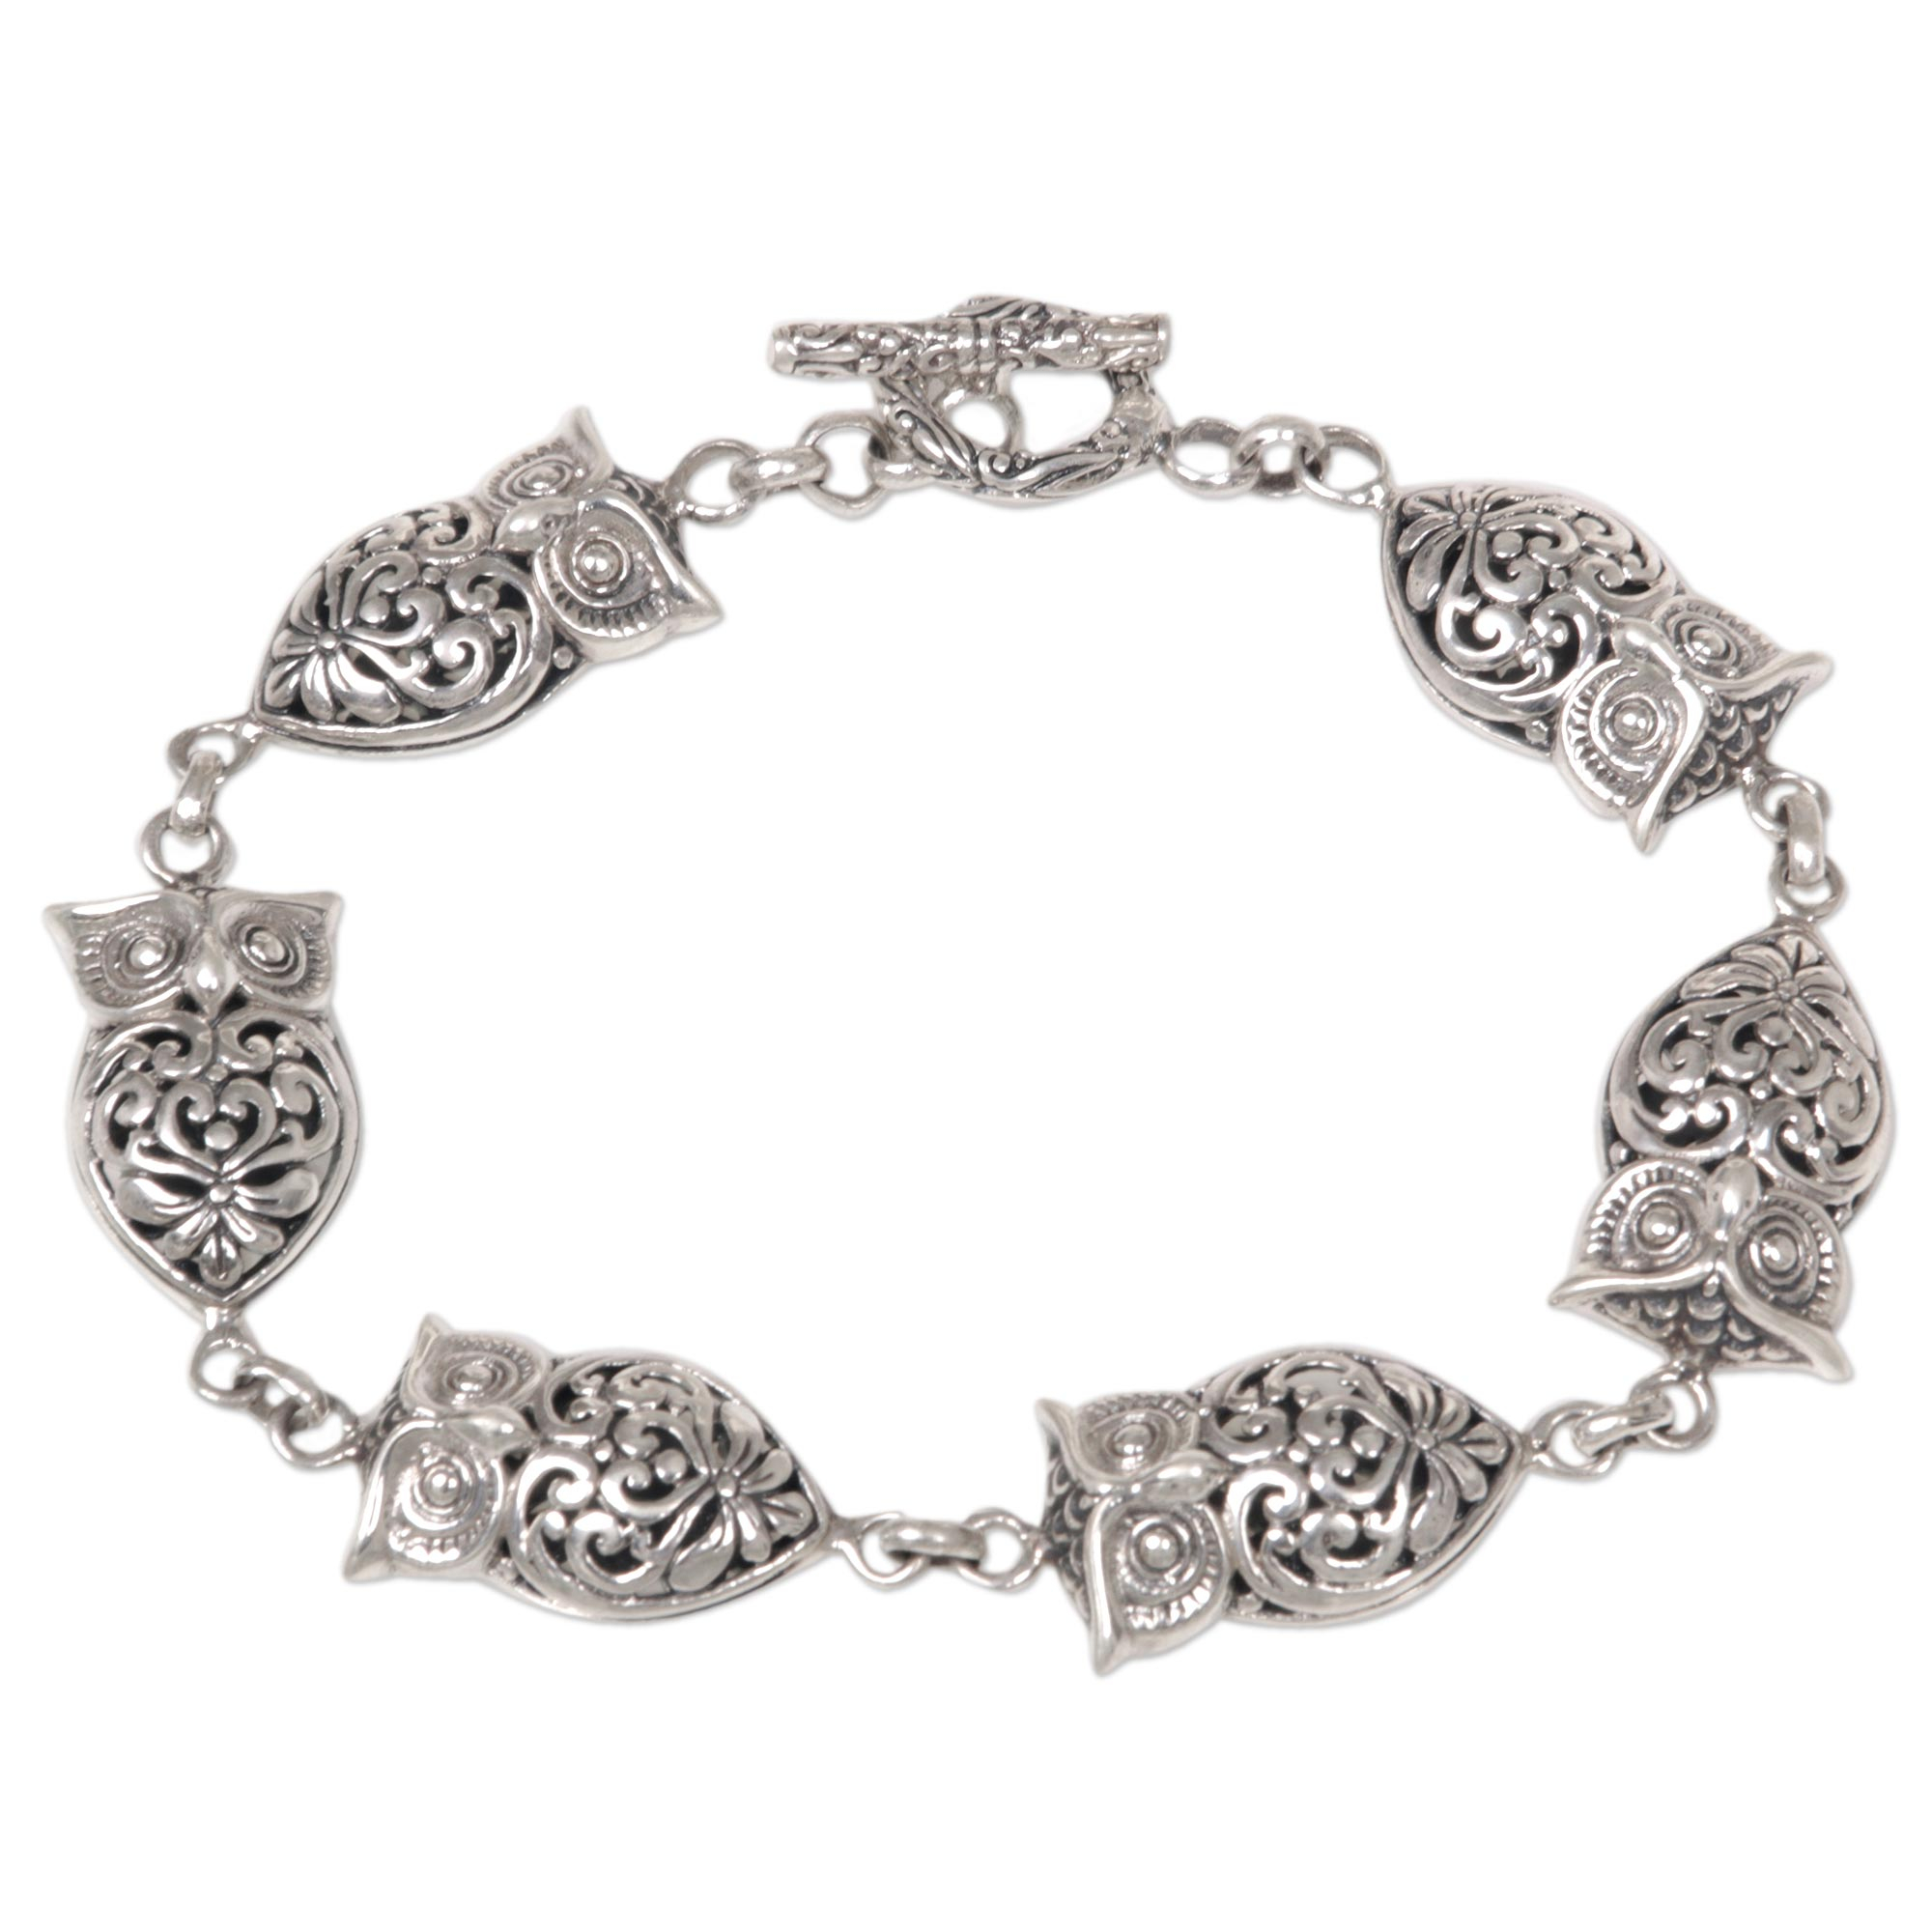 Hand Made Sterling Silver Owl Link Bracelet from Indonesia - Circling ...